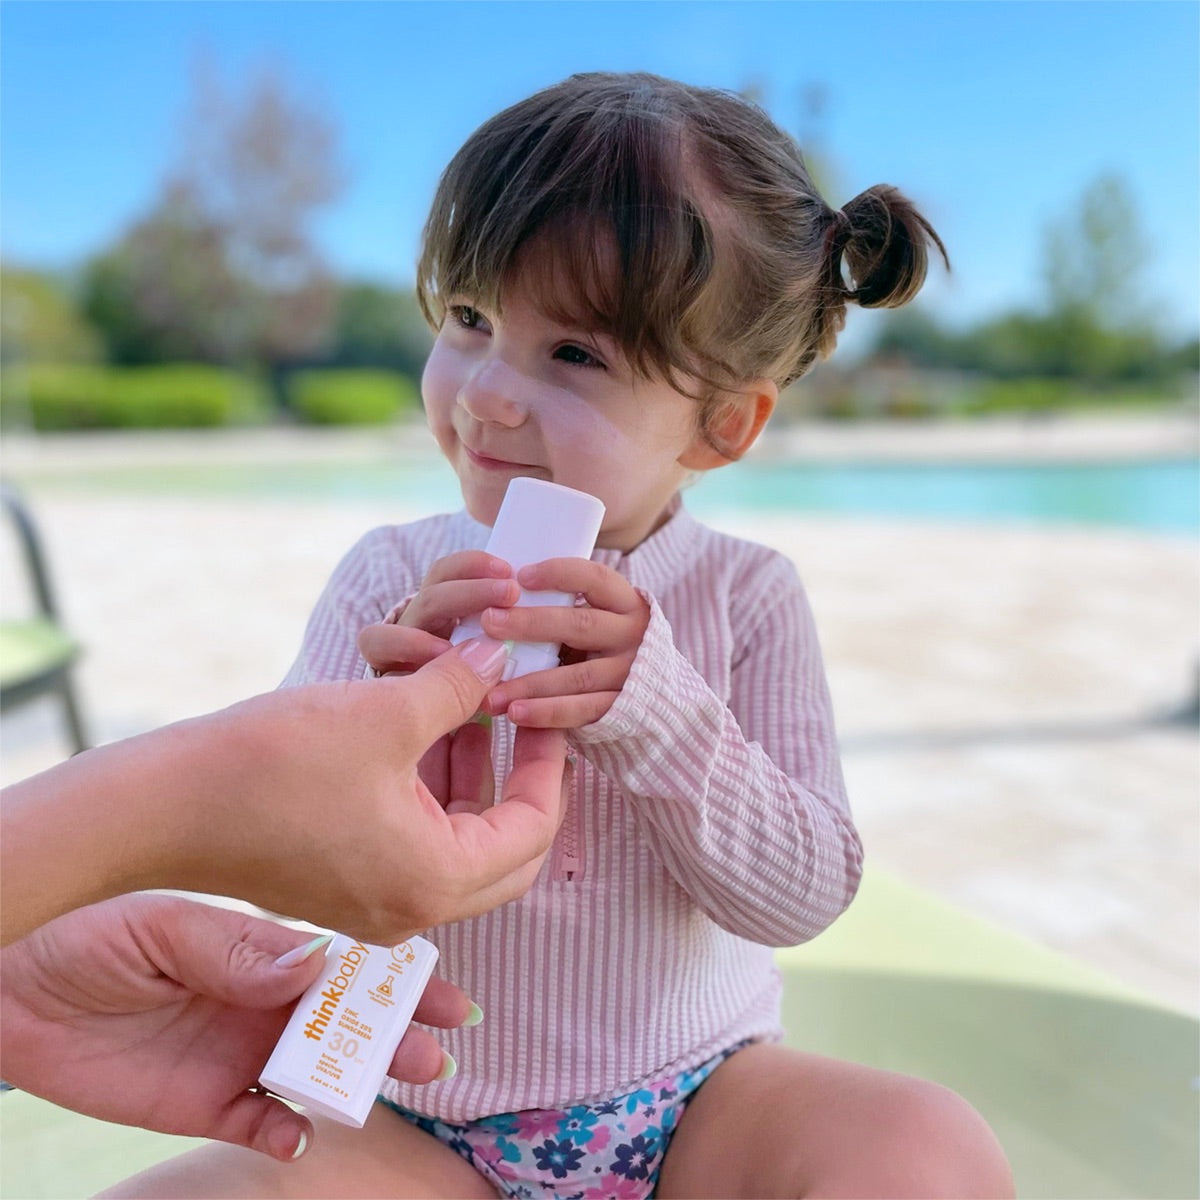 A young child smiling while applying Thinkbaby sunscreen stick with an adult&#39;s hand holding the tube, by a poolside on a sunny day.